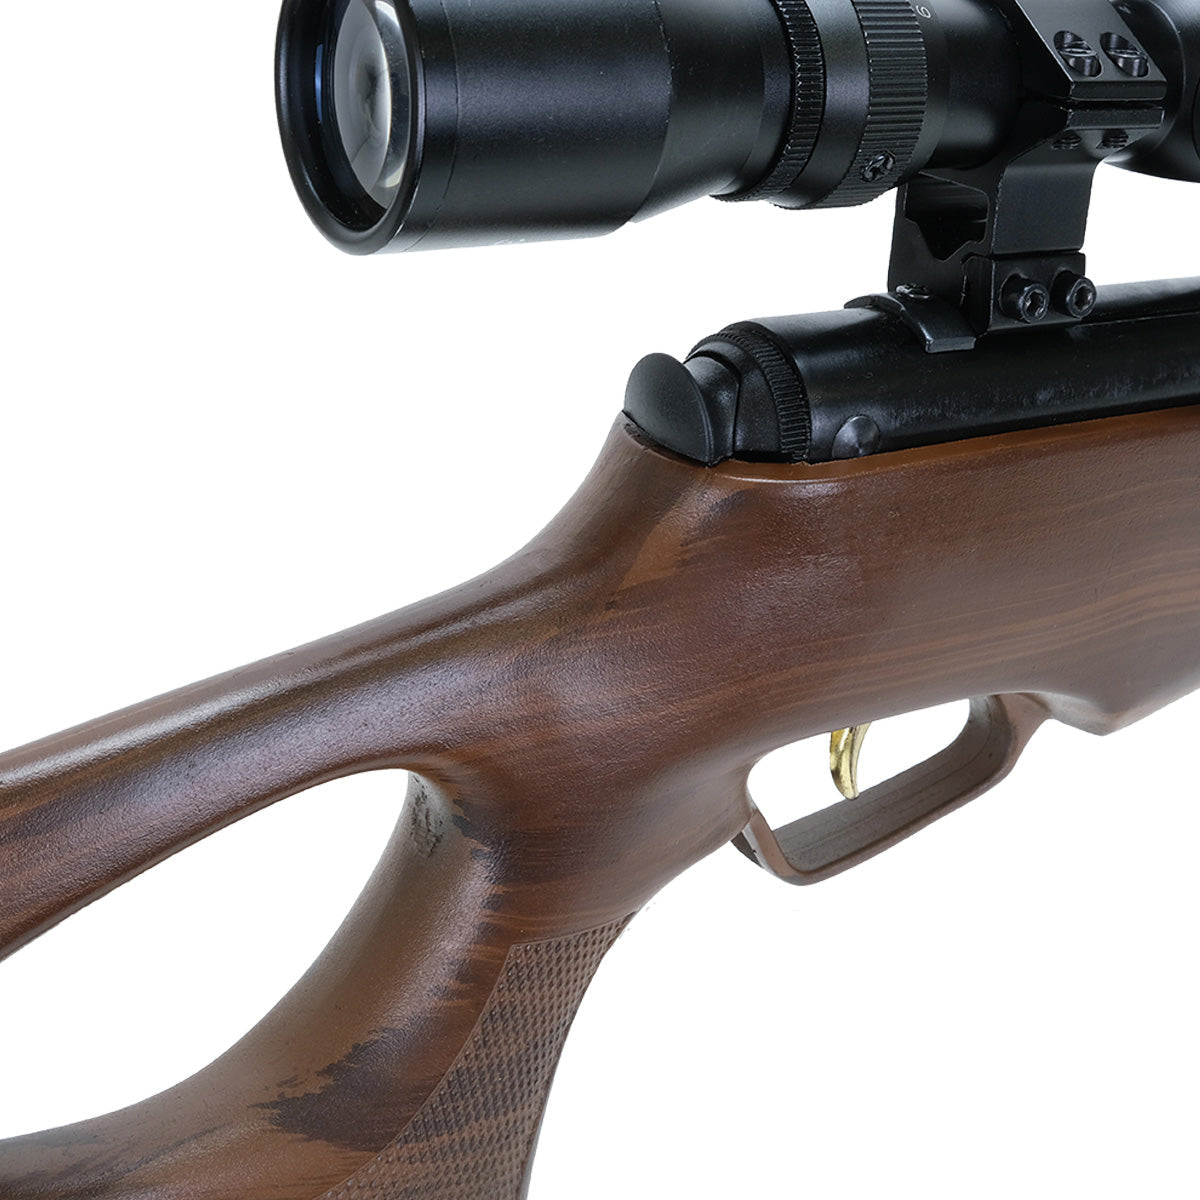 SALIX, TRIMEX ARMS TX05 BREAK BARREL SPRING AIR RIFLE WITH SYNTHETIC WOOD LOOK STOCK .177